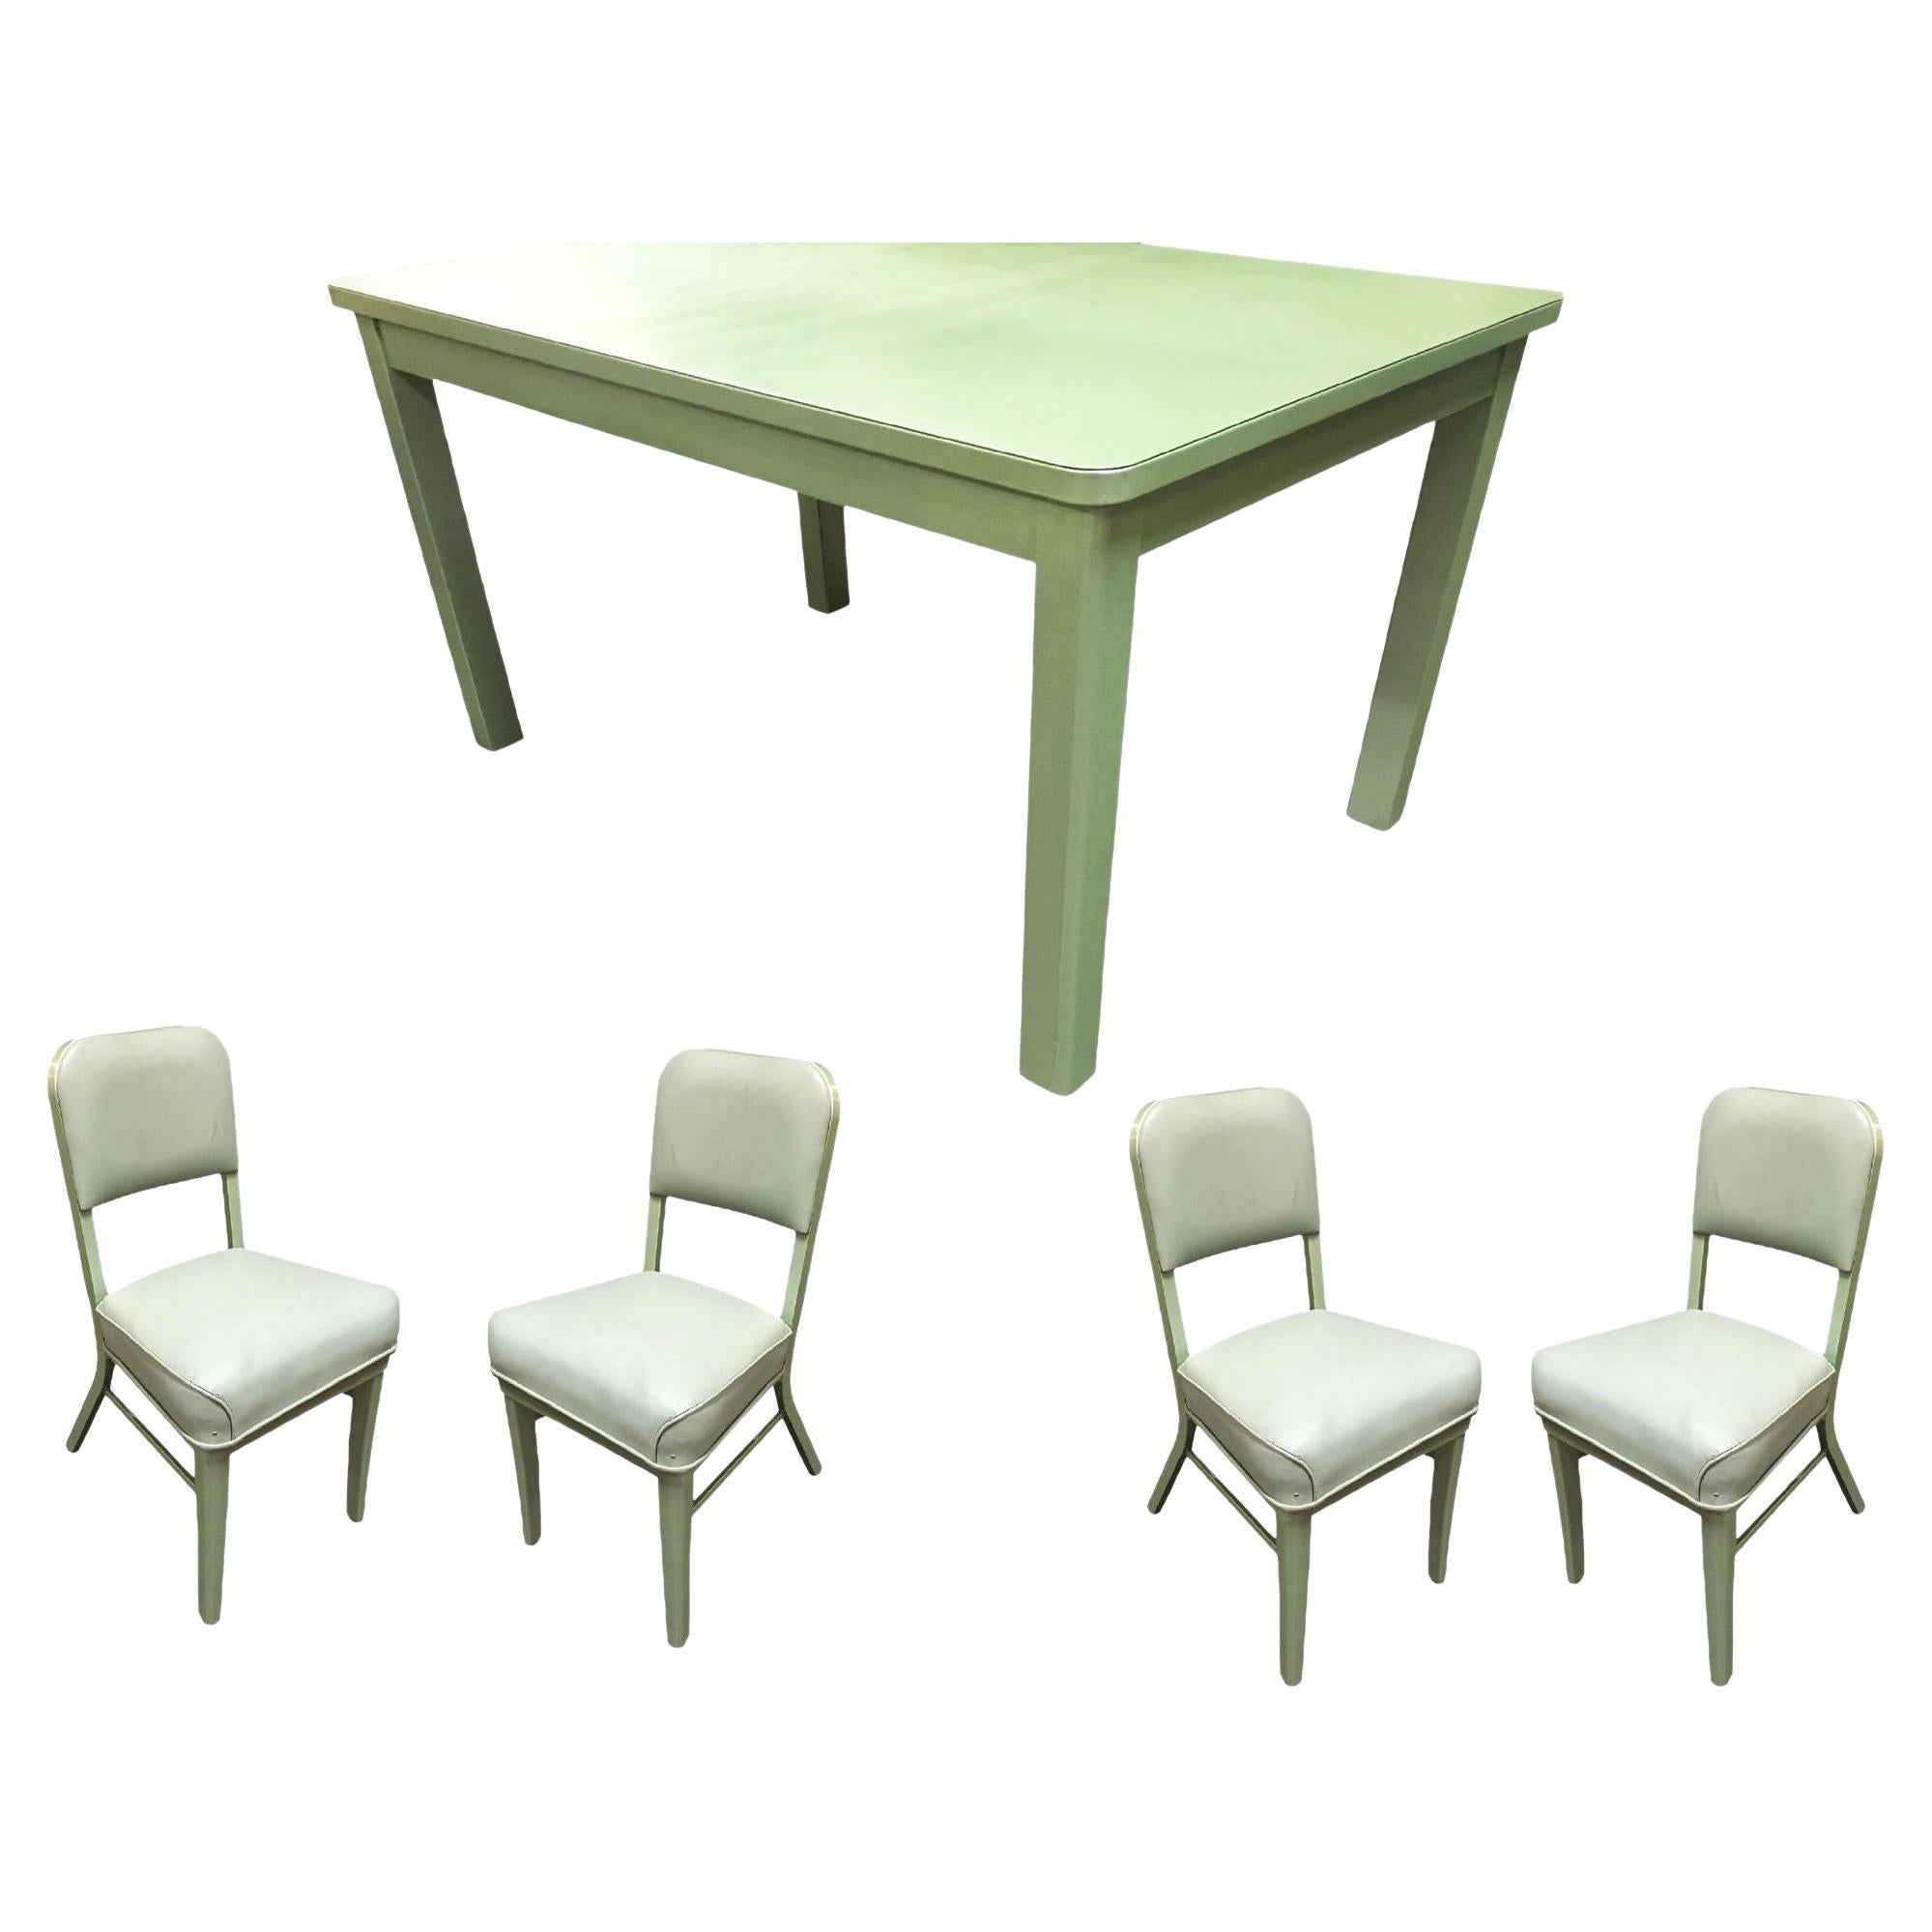 Midcentury Steelcase Tanker Dining Table and Chairs Set For Sale